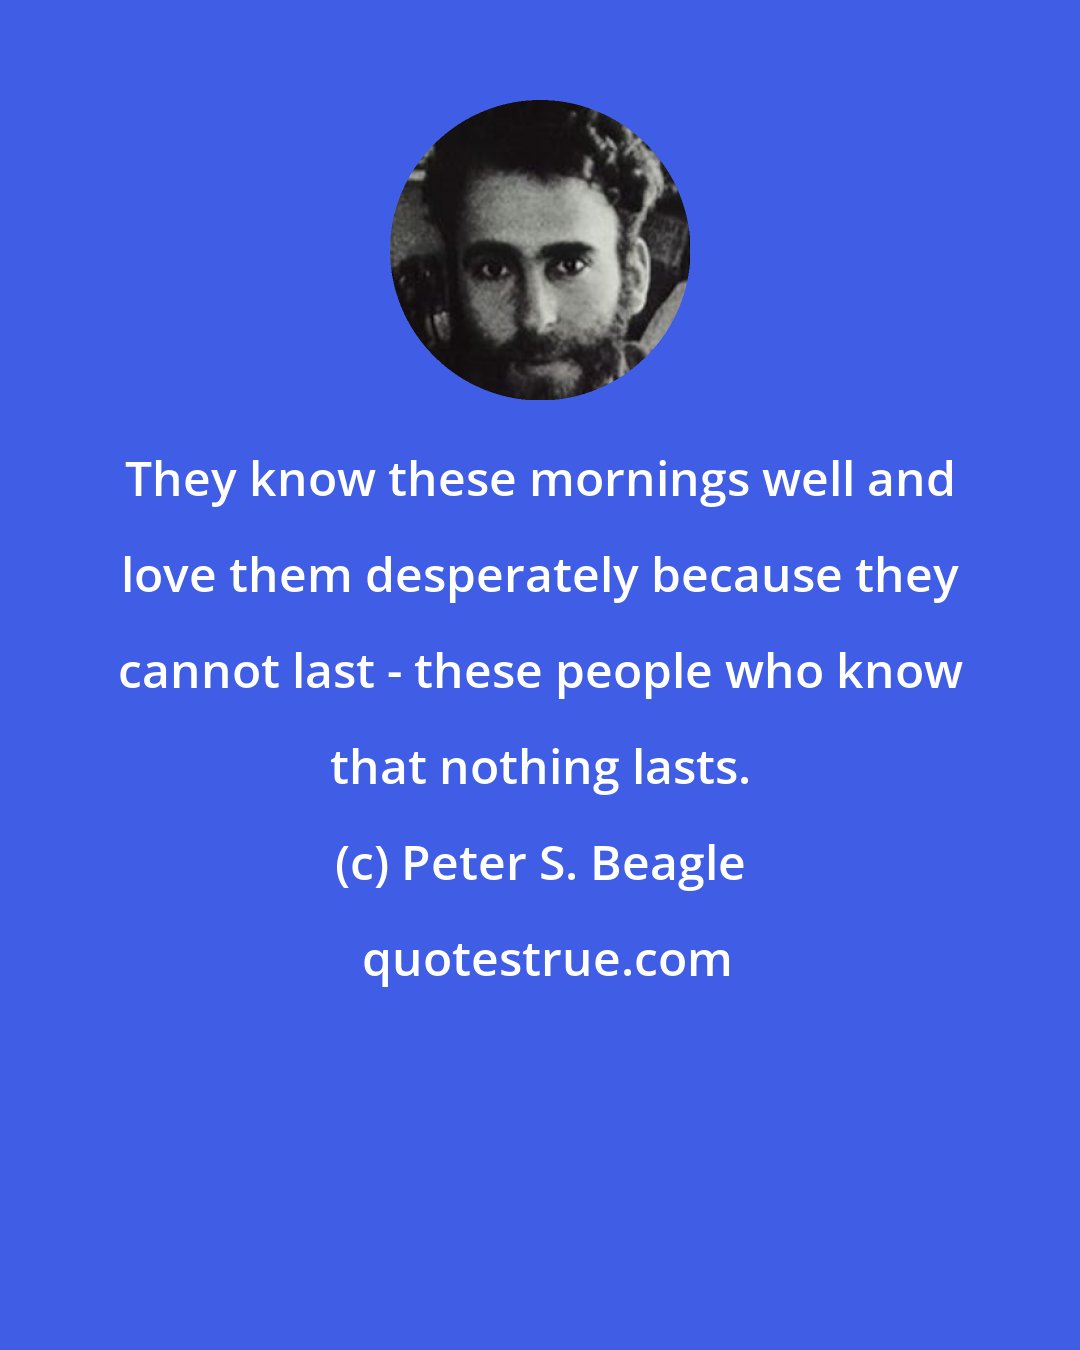 Peter S. Beagle: They know these mornings well and love them desperately because they cannot last - these people who know that nothing lasts.